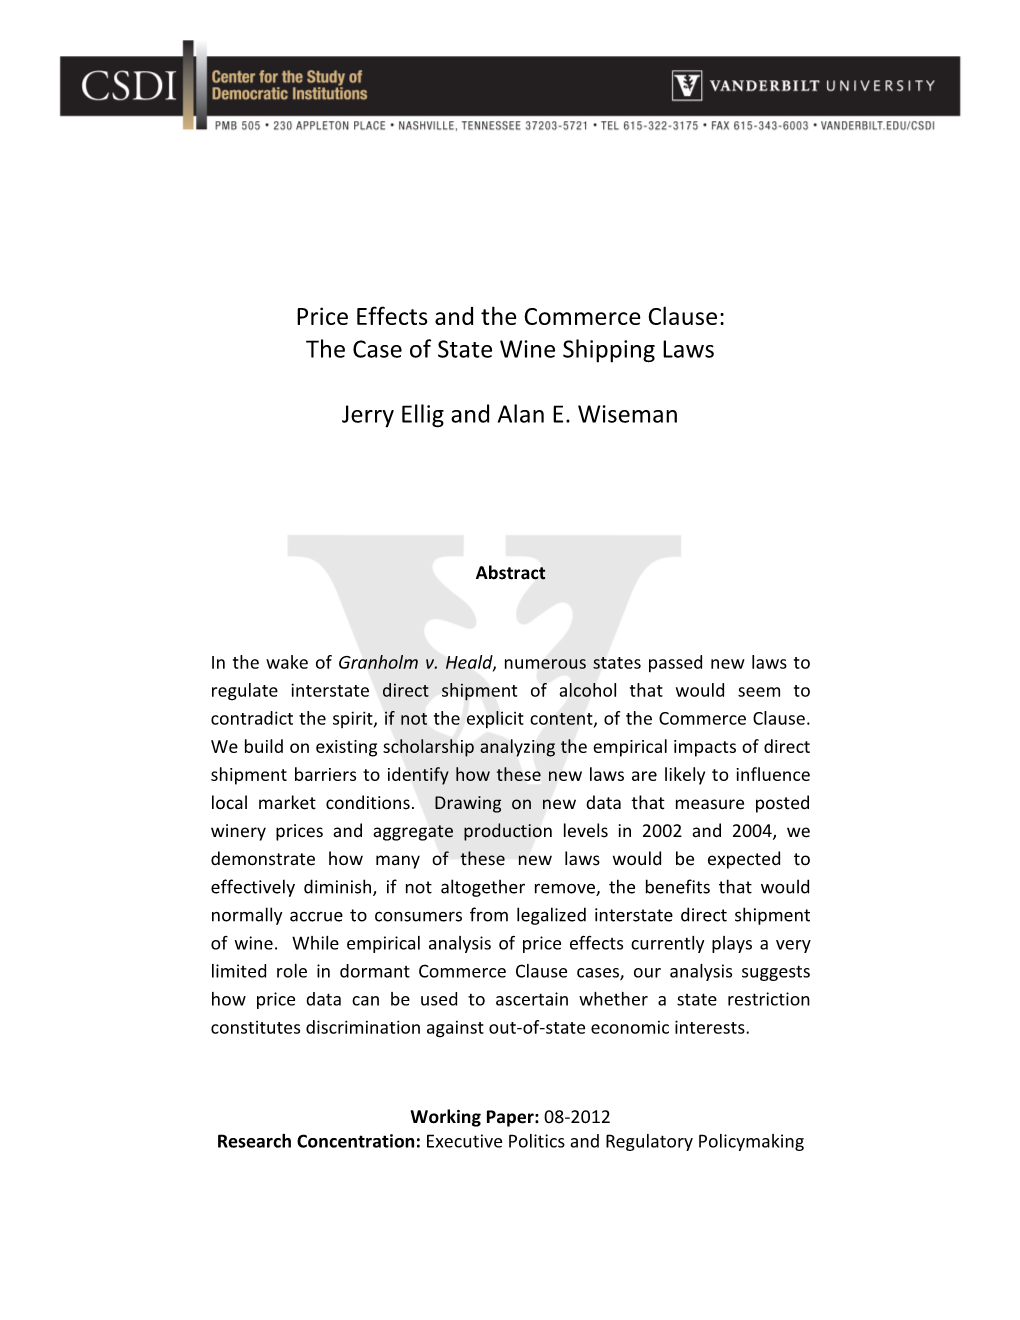 Price Effects and the Commerce Clause: the Case of State Wine Shipping Laws